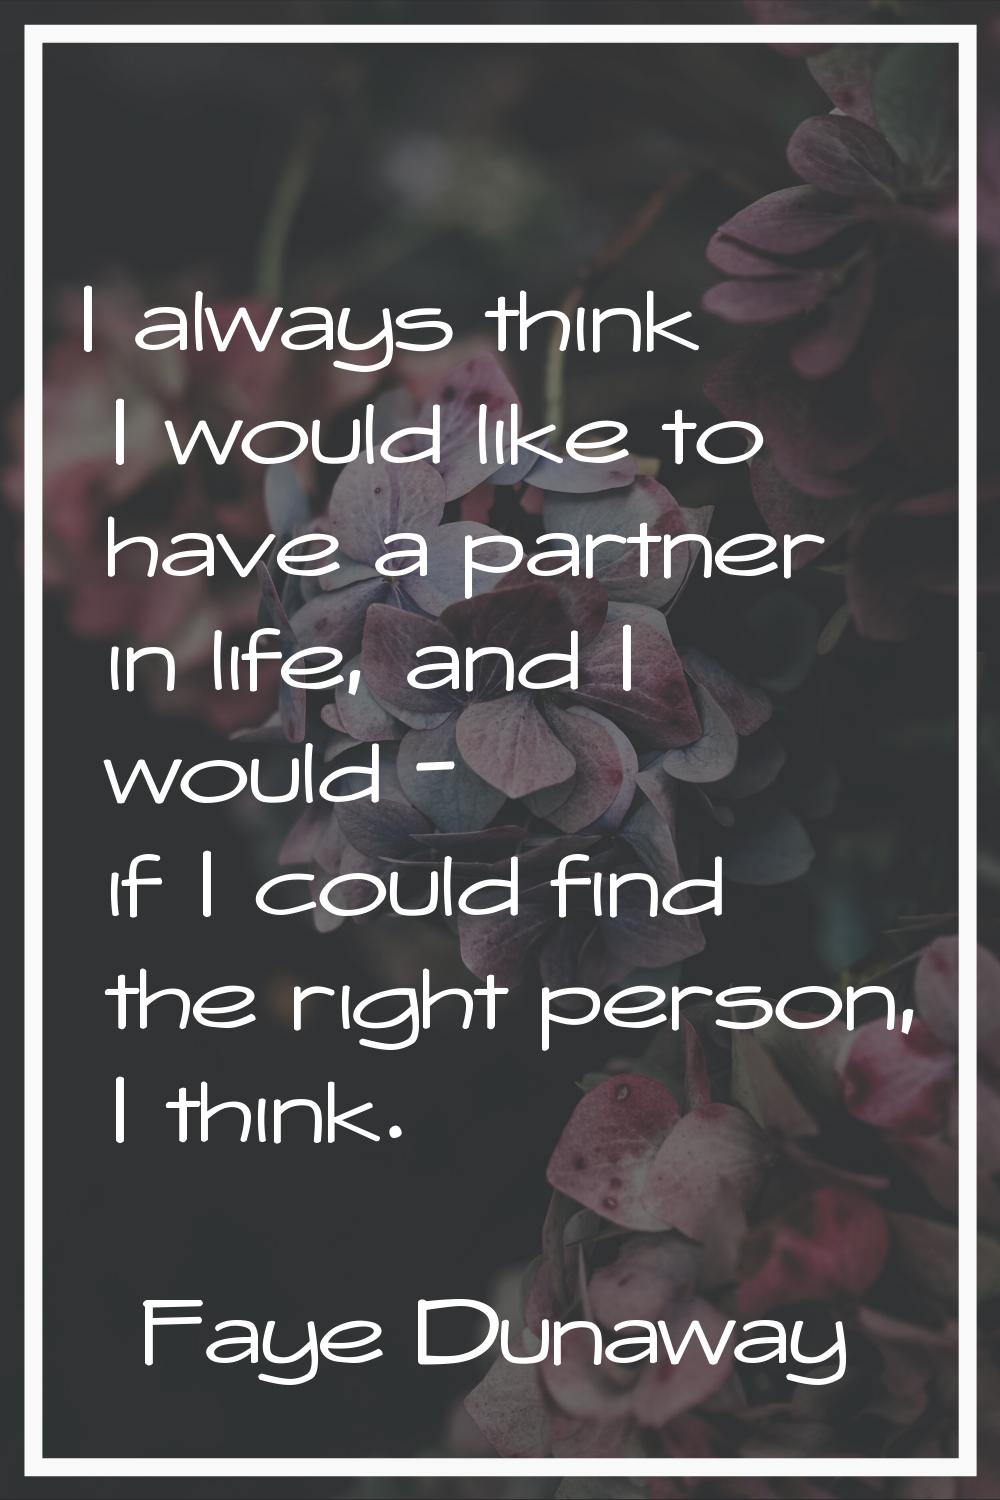 I always think I would like to have a partner in life, and I would - if I could find the right pers